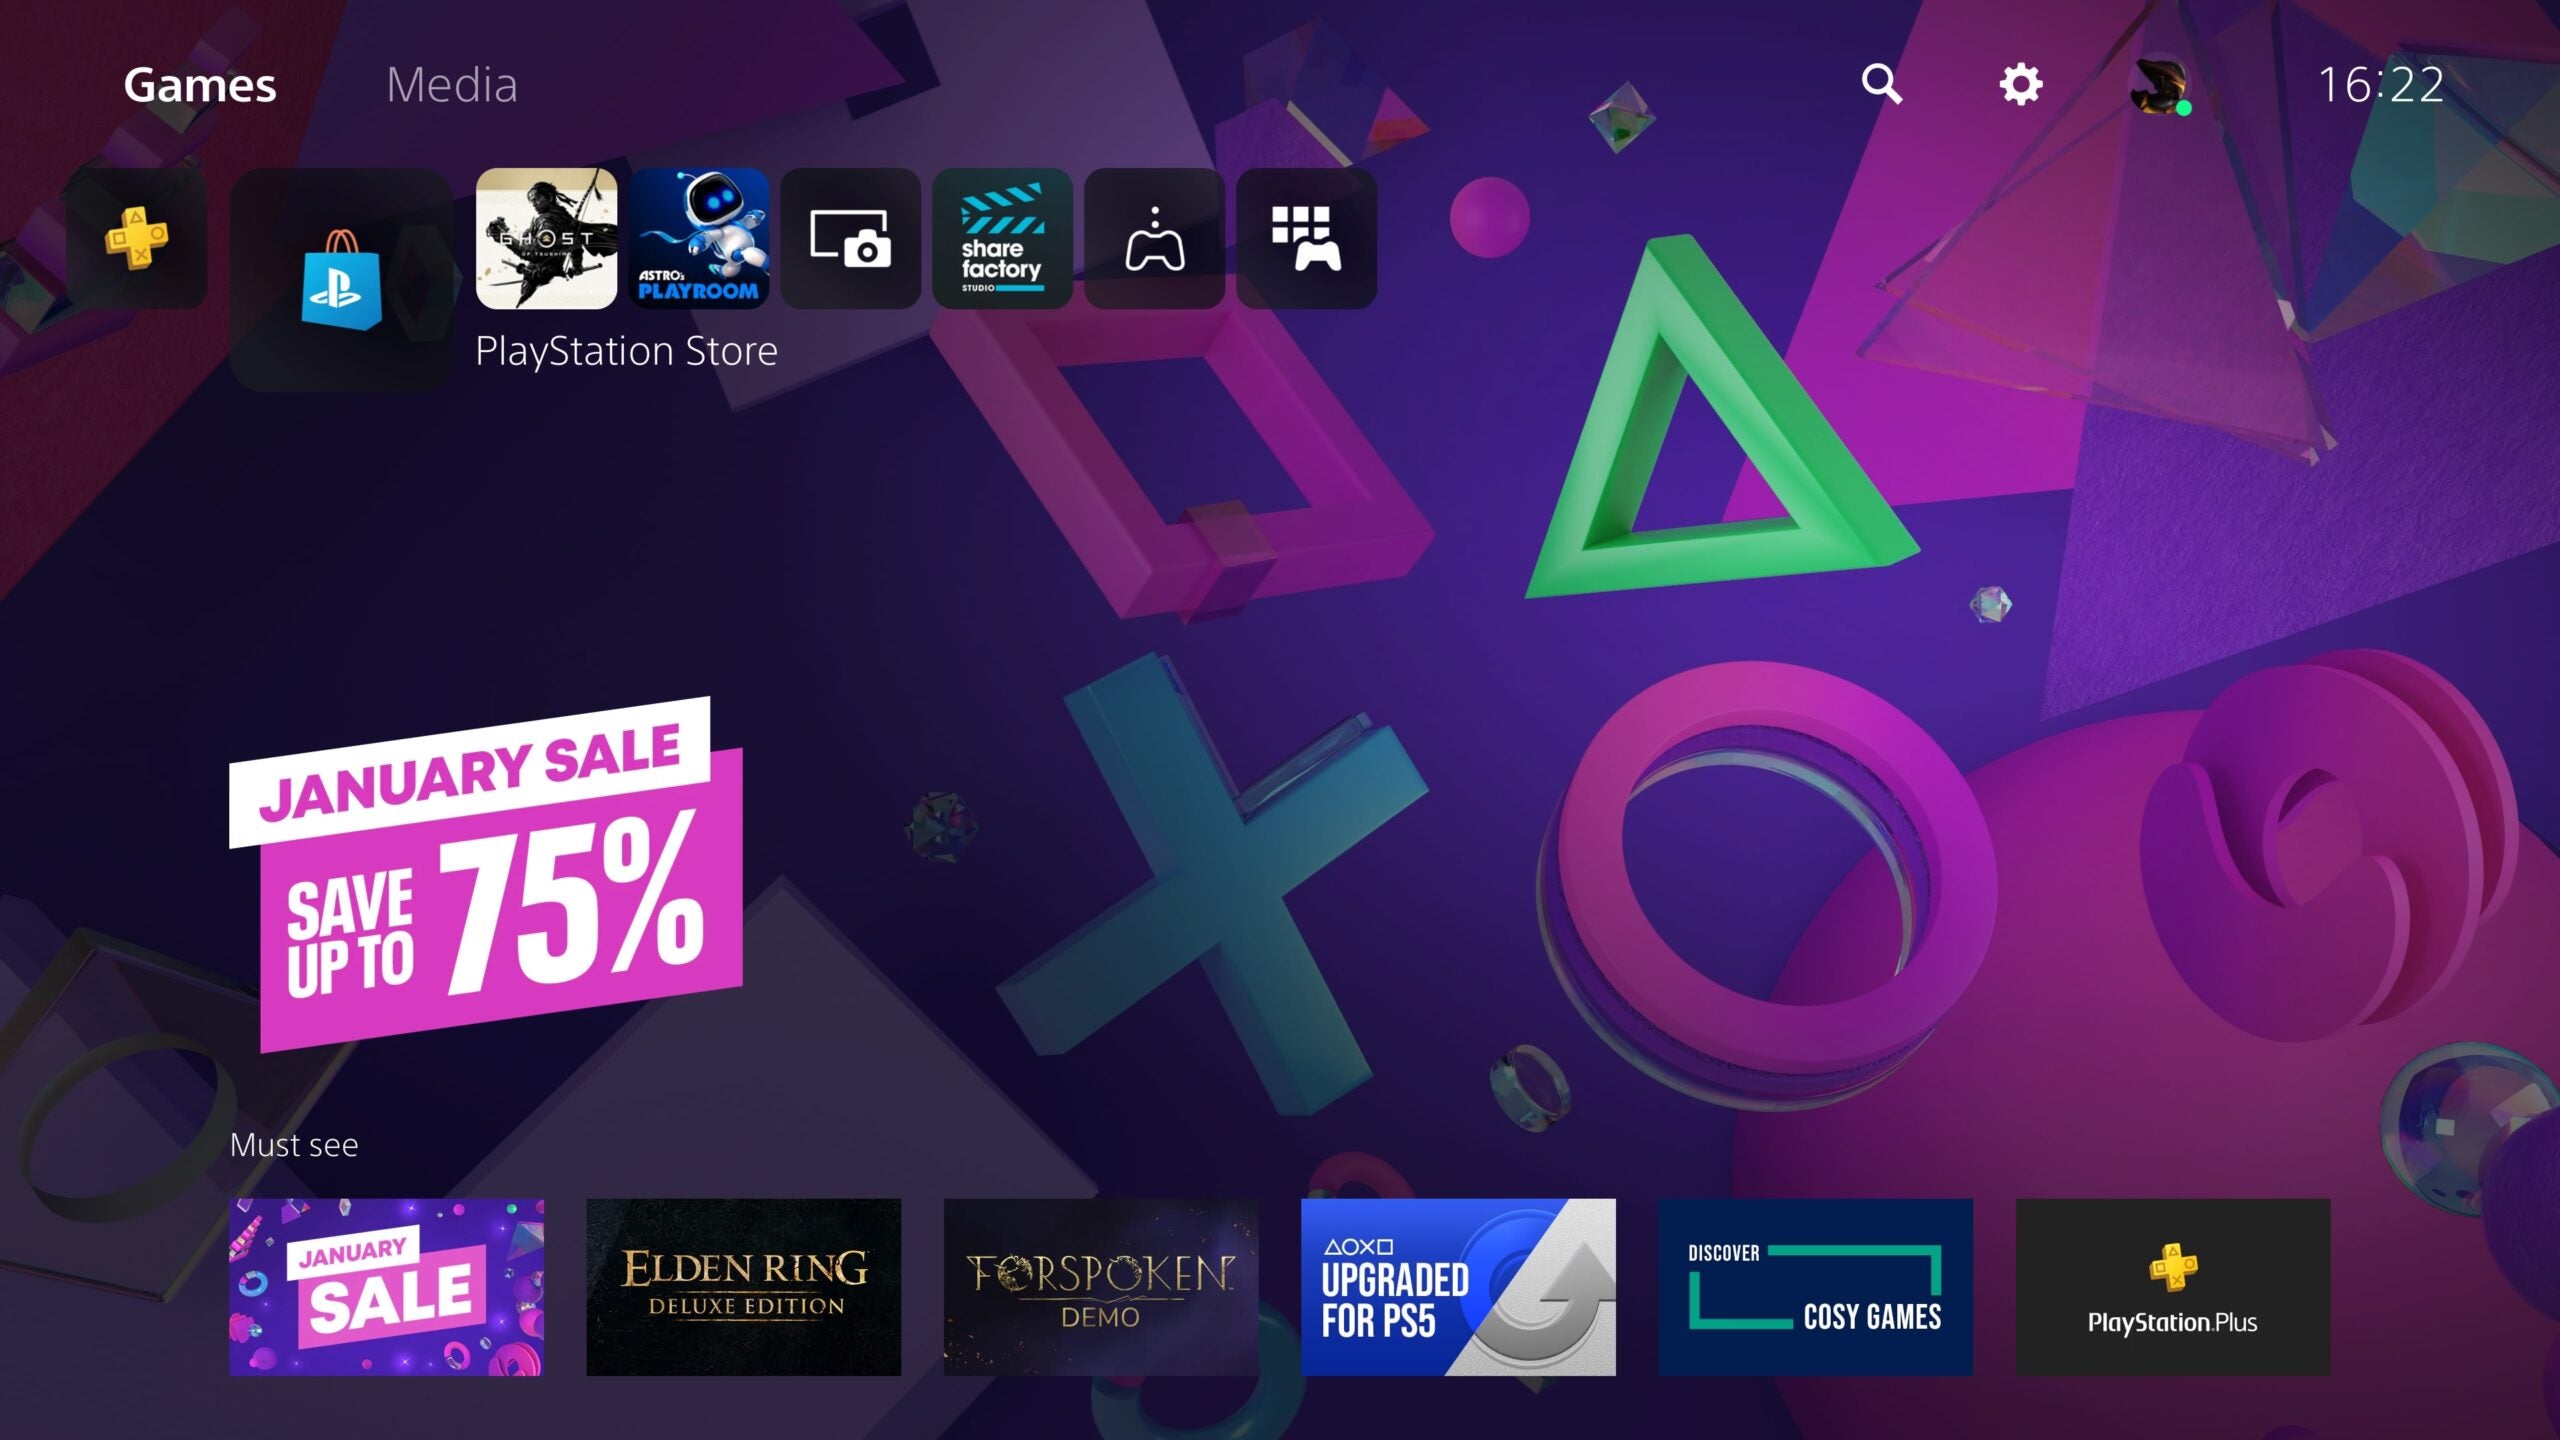 When on the PlayStation Store, scroll down to bring up the contextual menu for the store